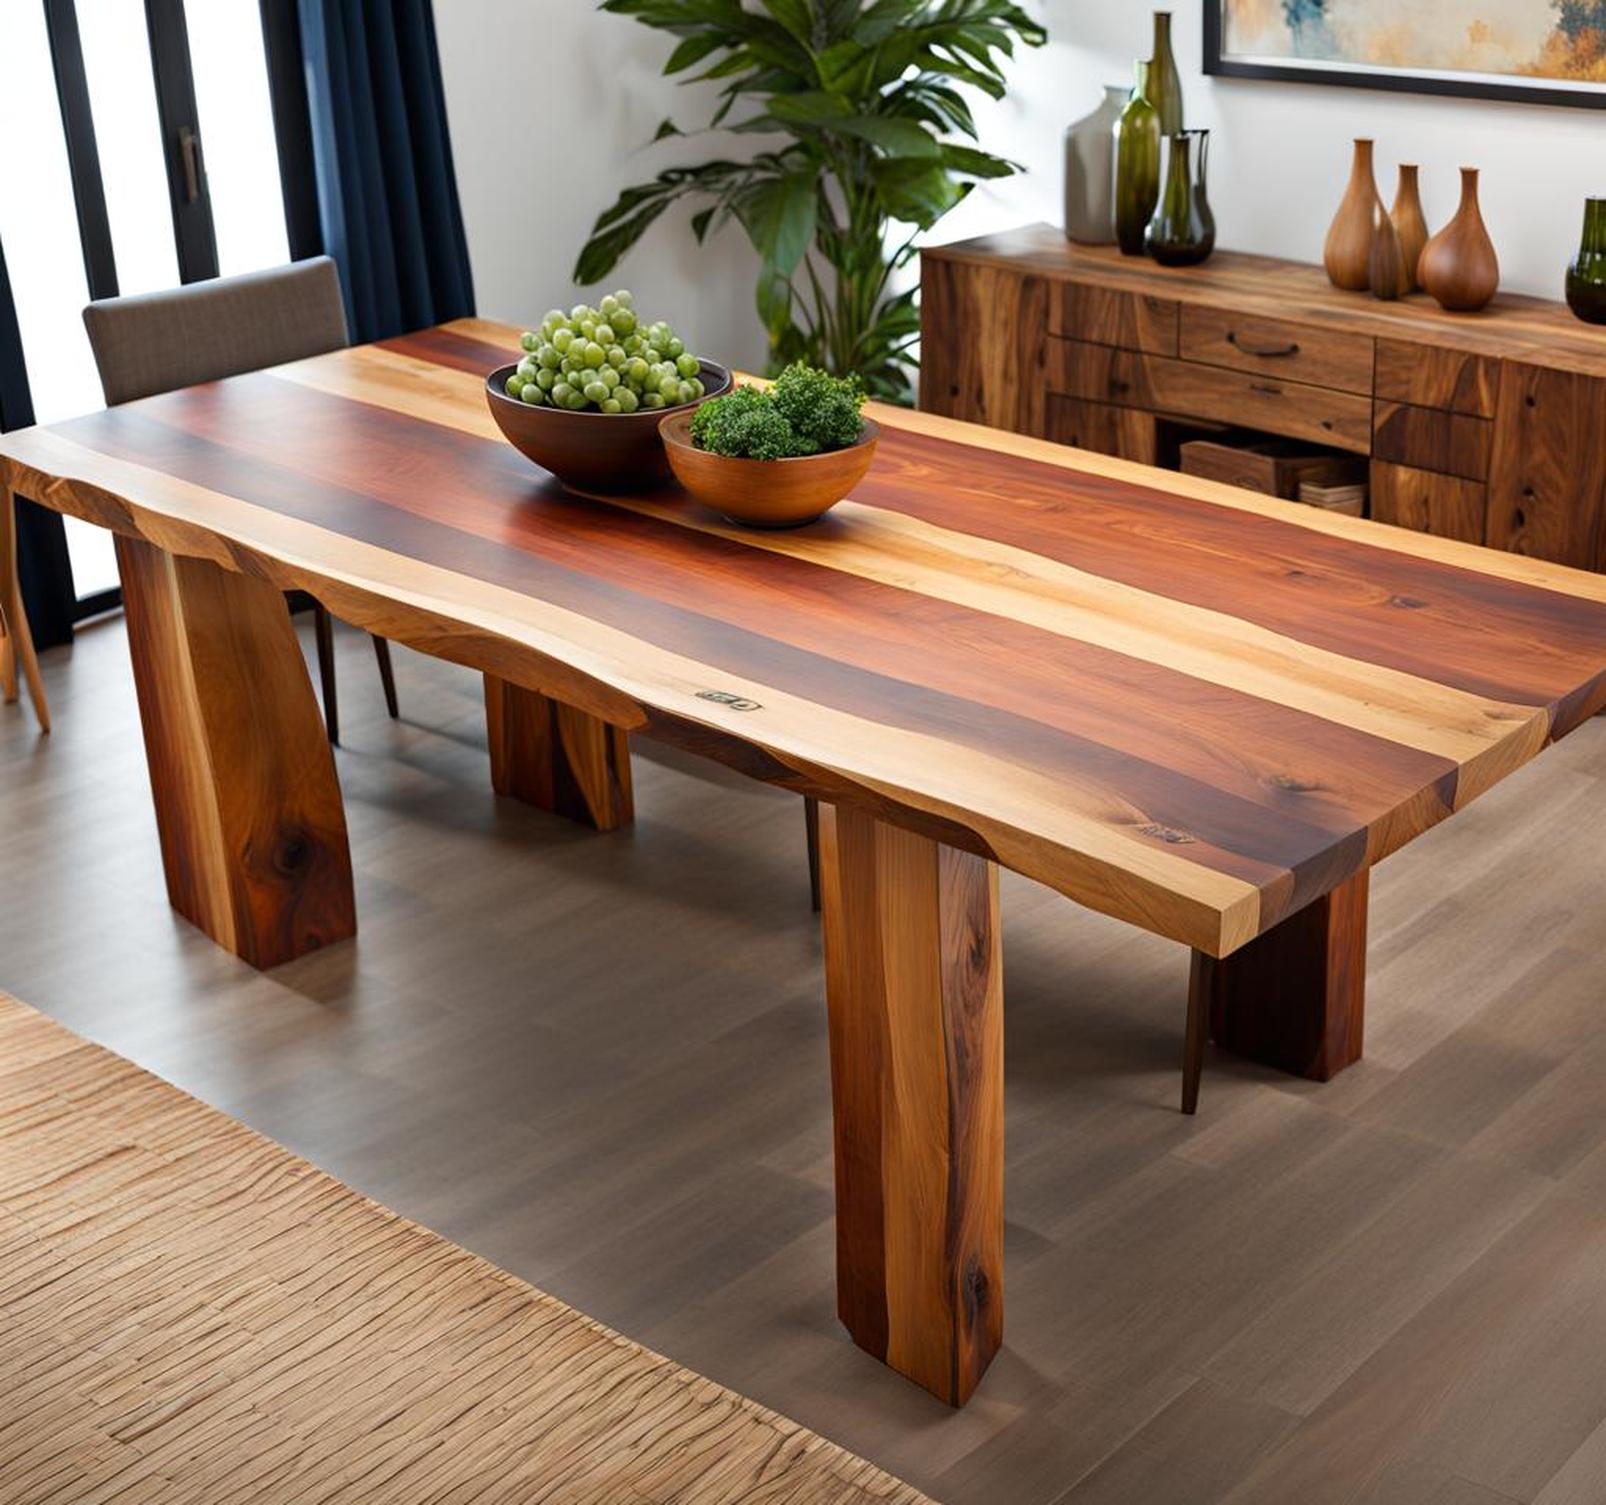 Give Your Dining Room A Unique Rustic Look With An Aero Wood Rectangular Table